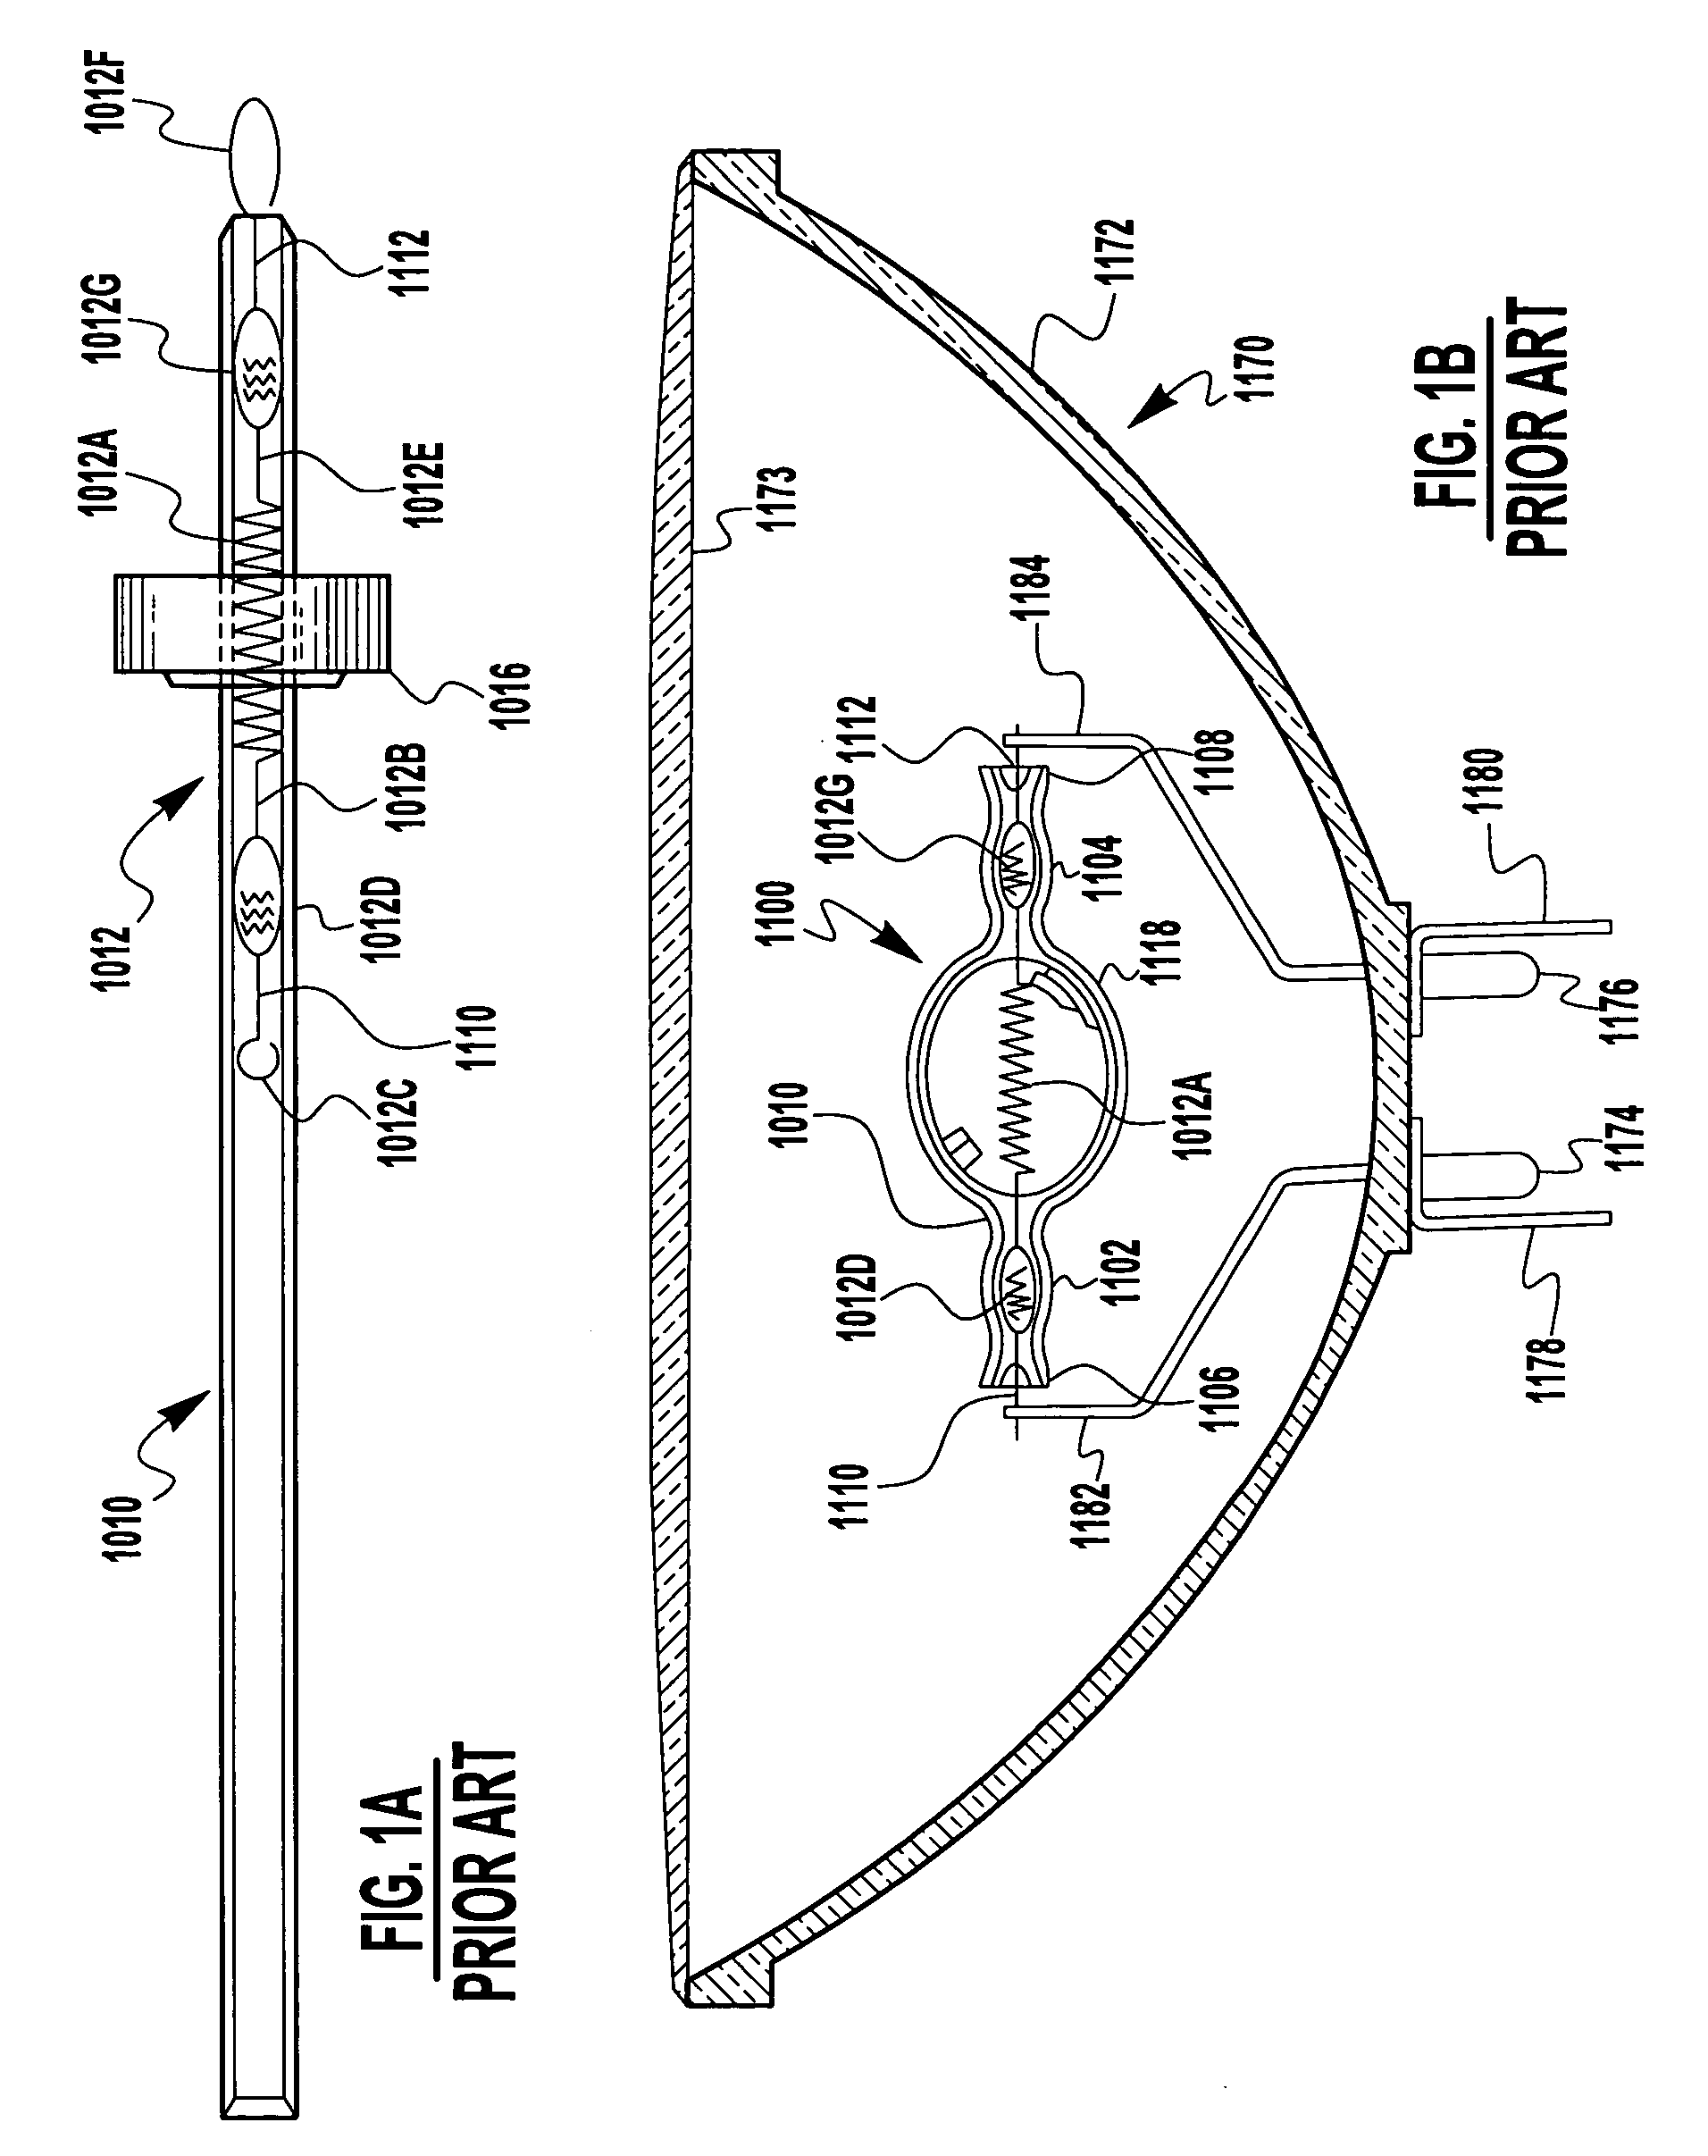 Apparatus and process for finishing light source filament tubes and arc tubes